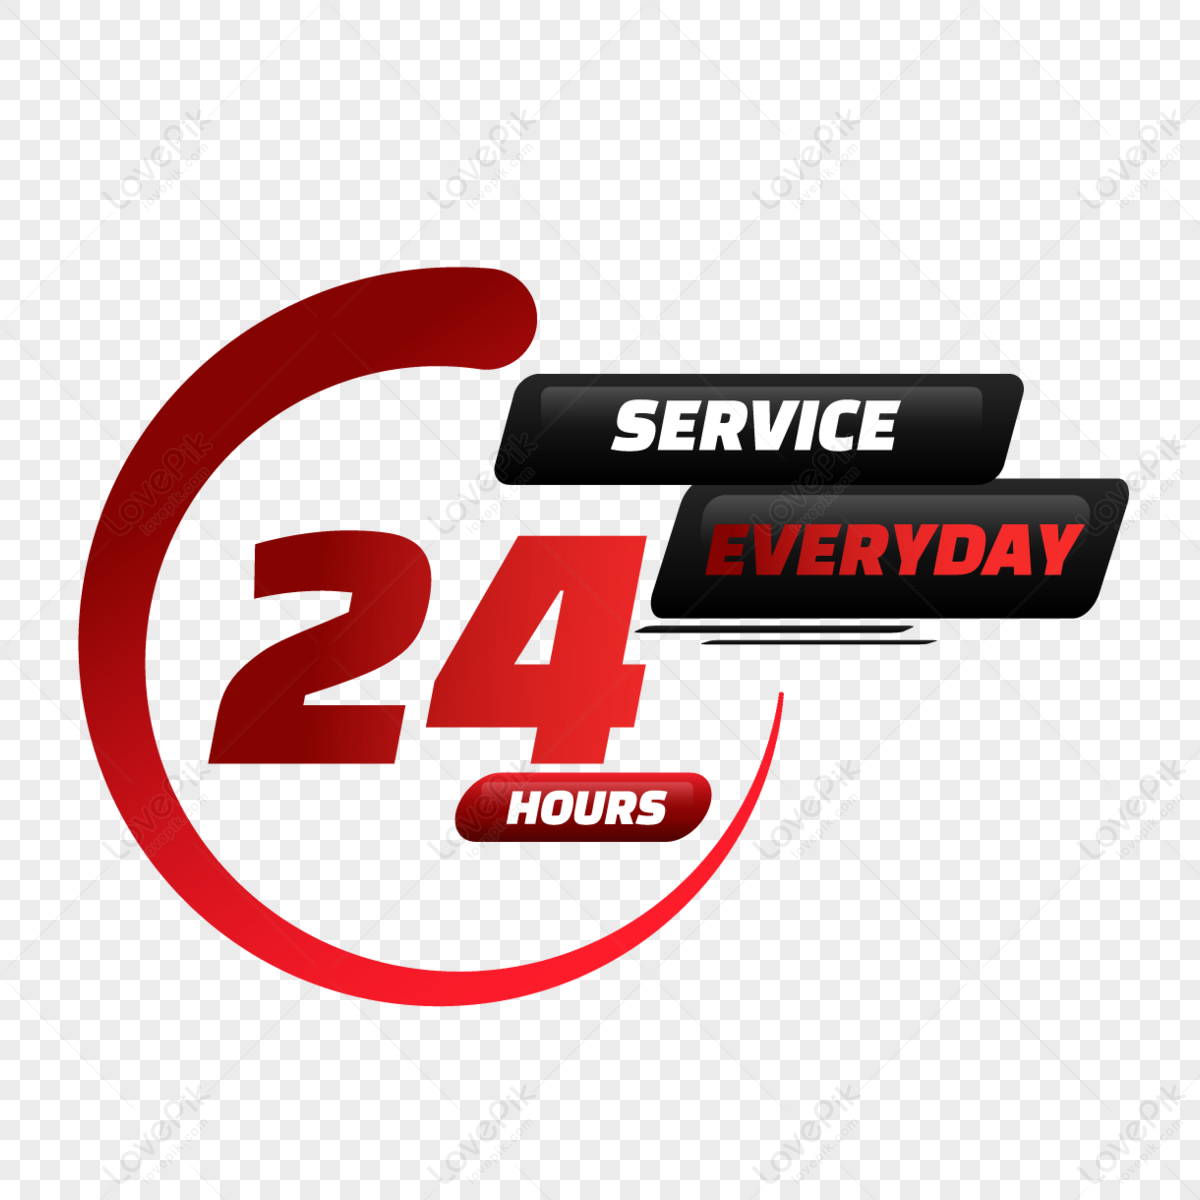 24 Hours Service Everyday Business Logo-icon Design Template Stock Vector -  Illustration of help, hours: 240464695